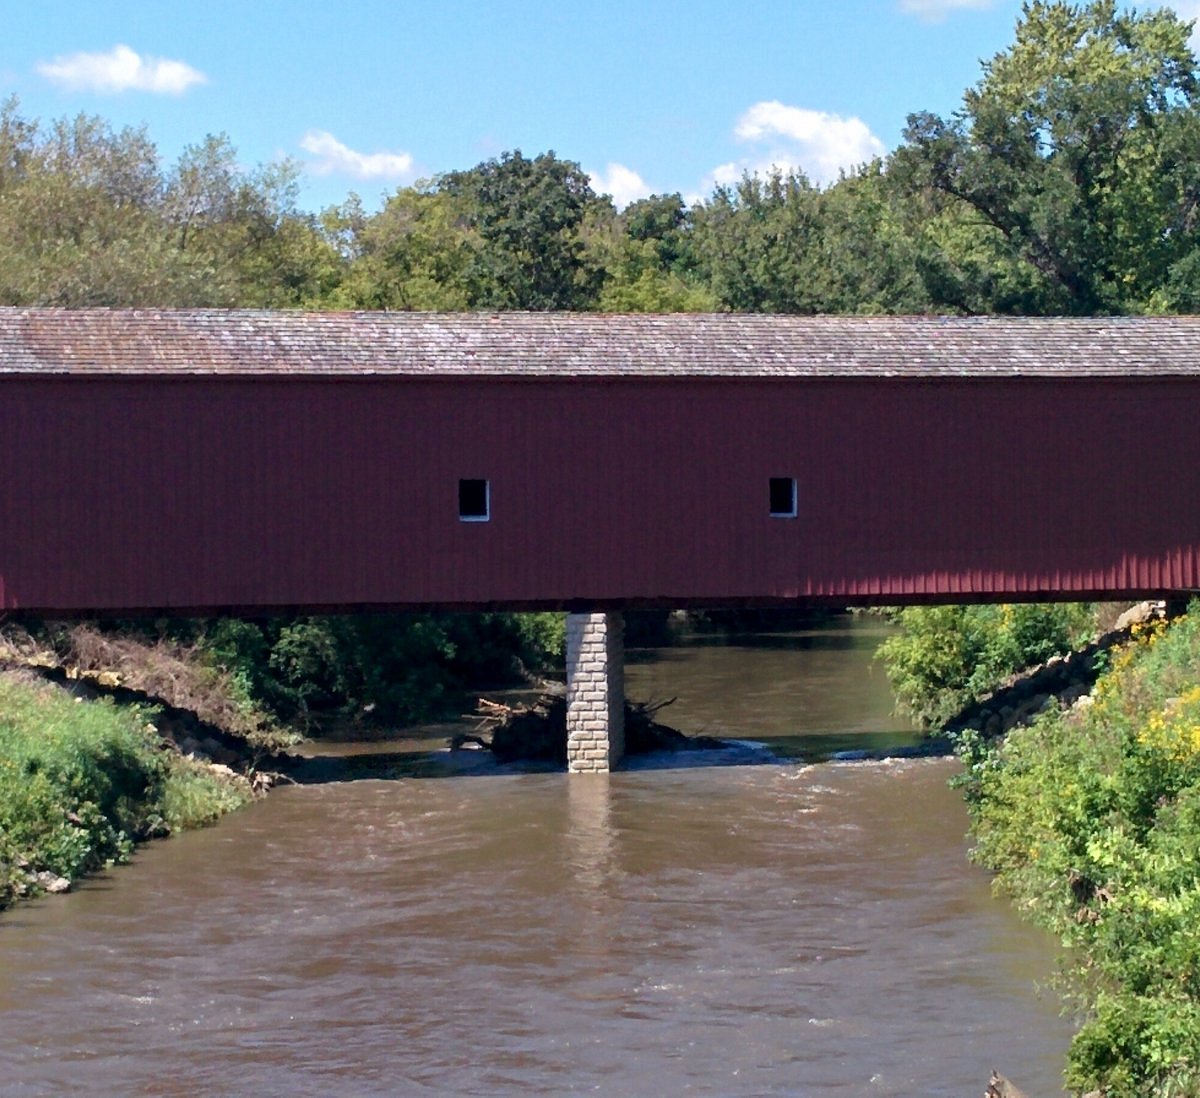 ZUMBROTA COVERED BRIDGE What to Know BEFORE You Go